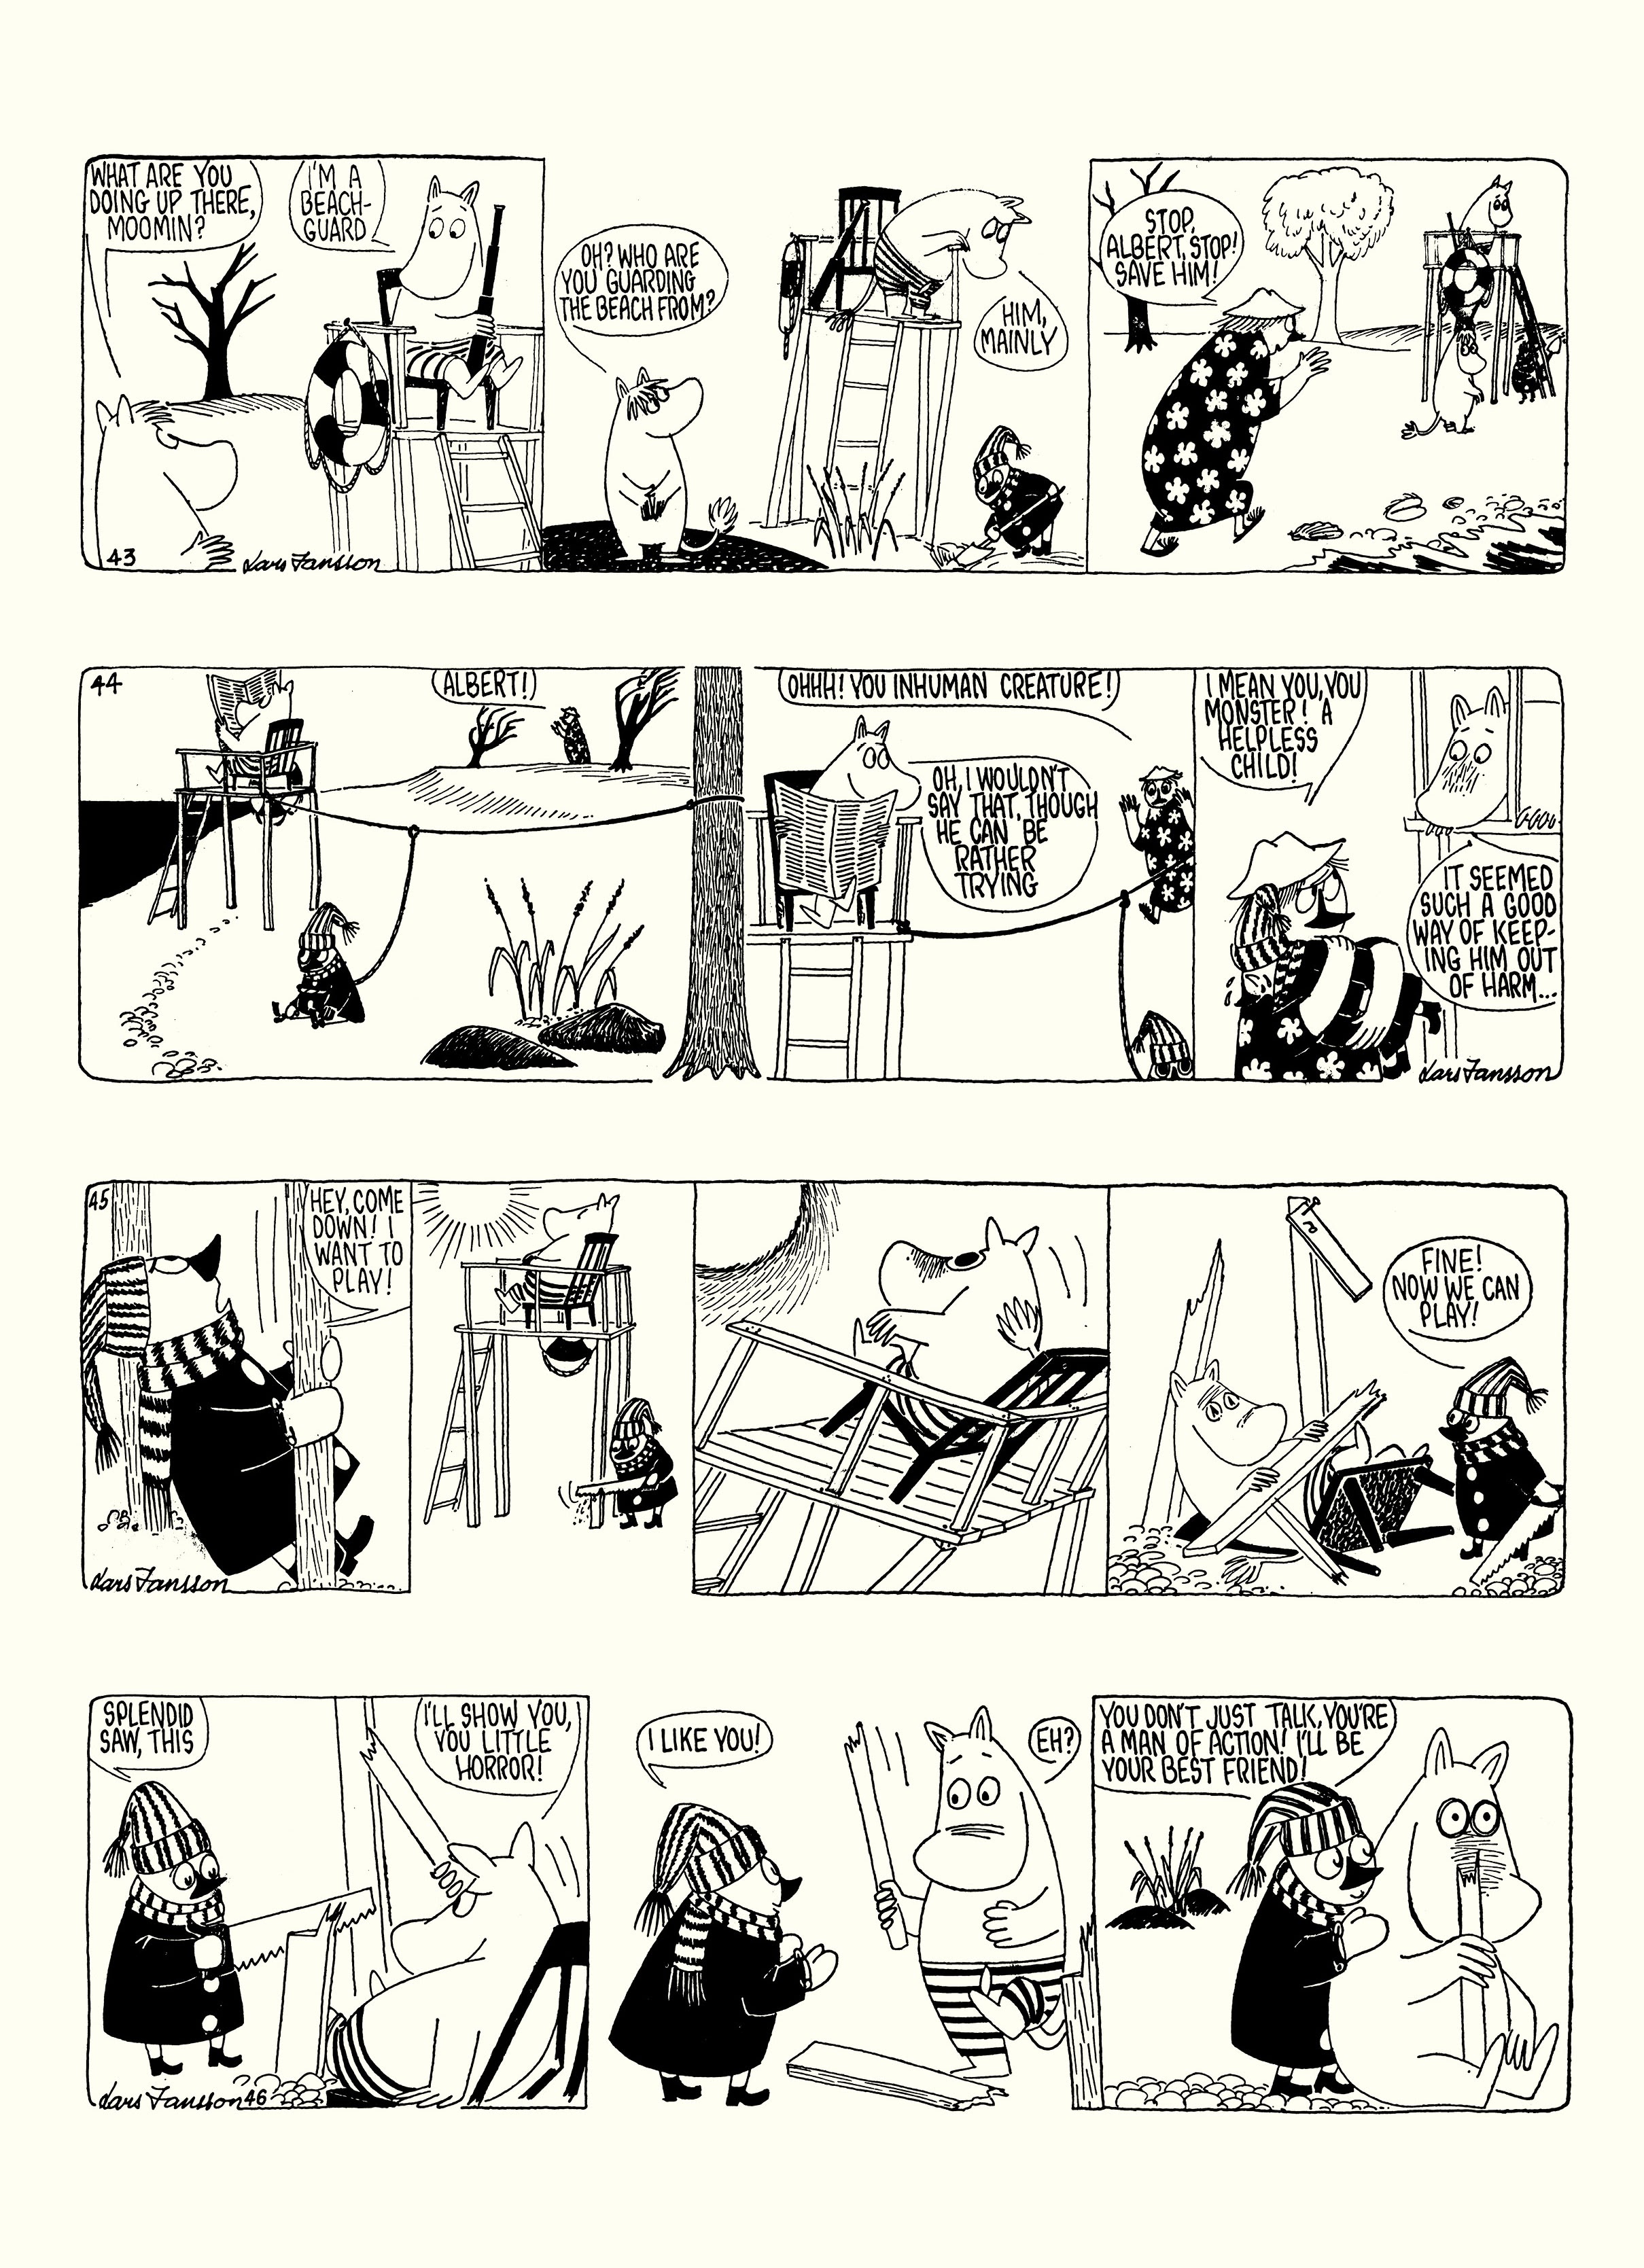 Read online Moomin: The Complete Lars Jansson Comic Strip comic -  Issue # TPB 8 - 62